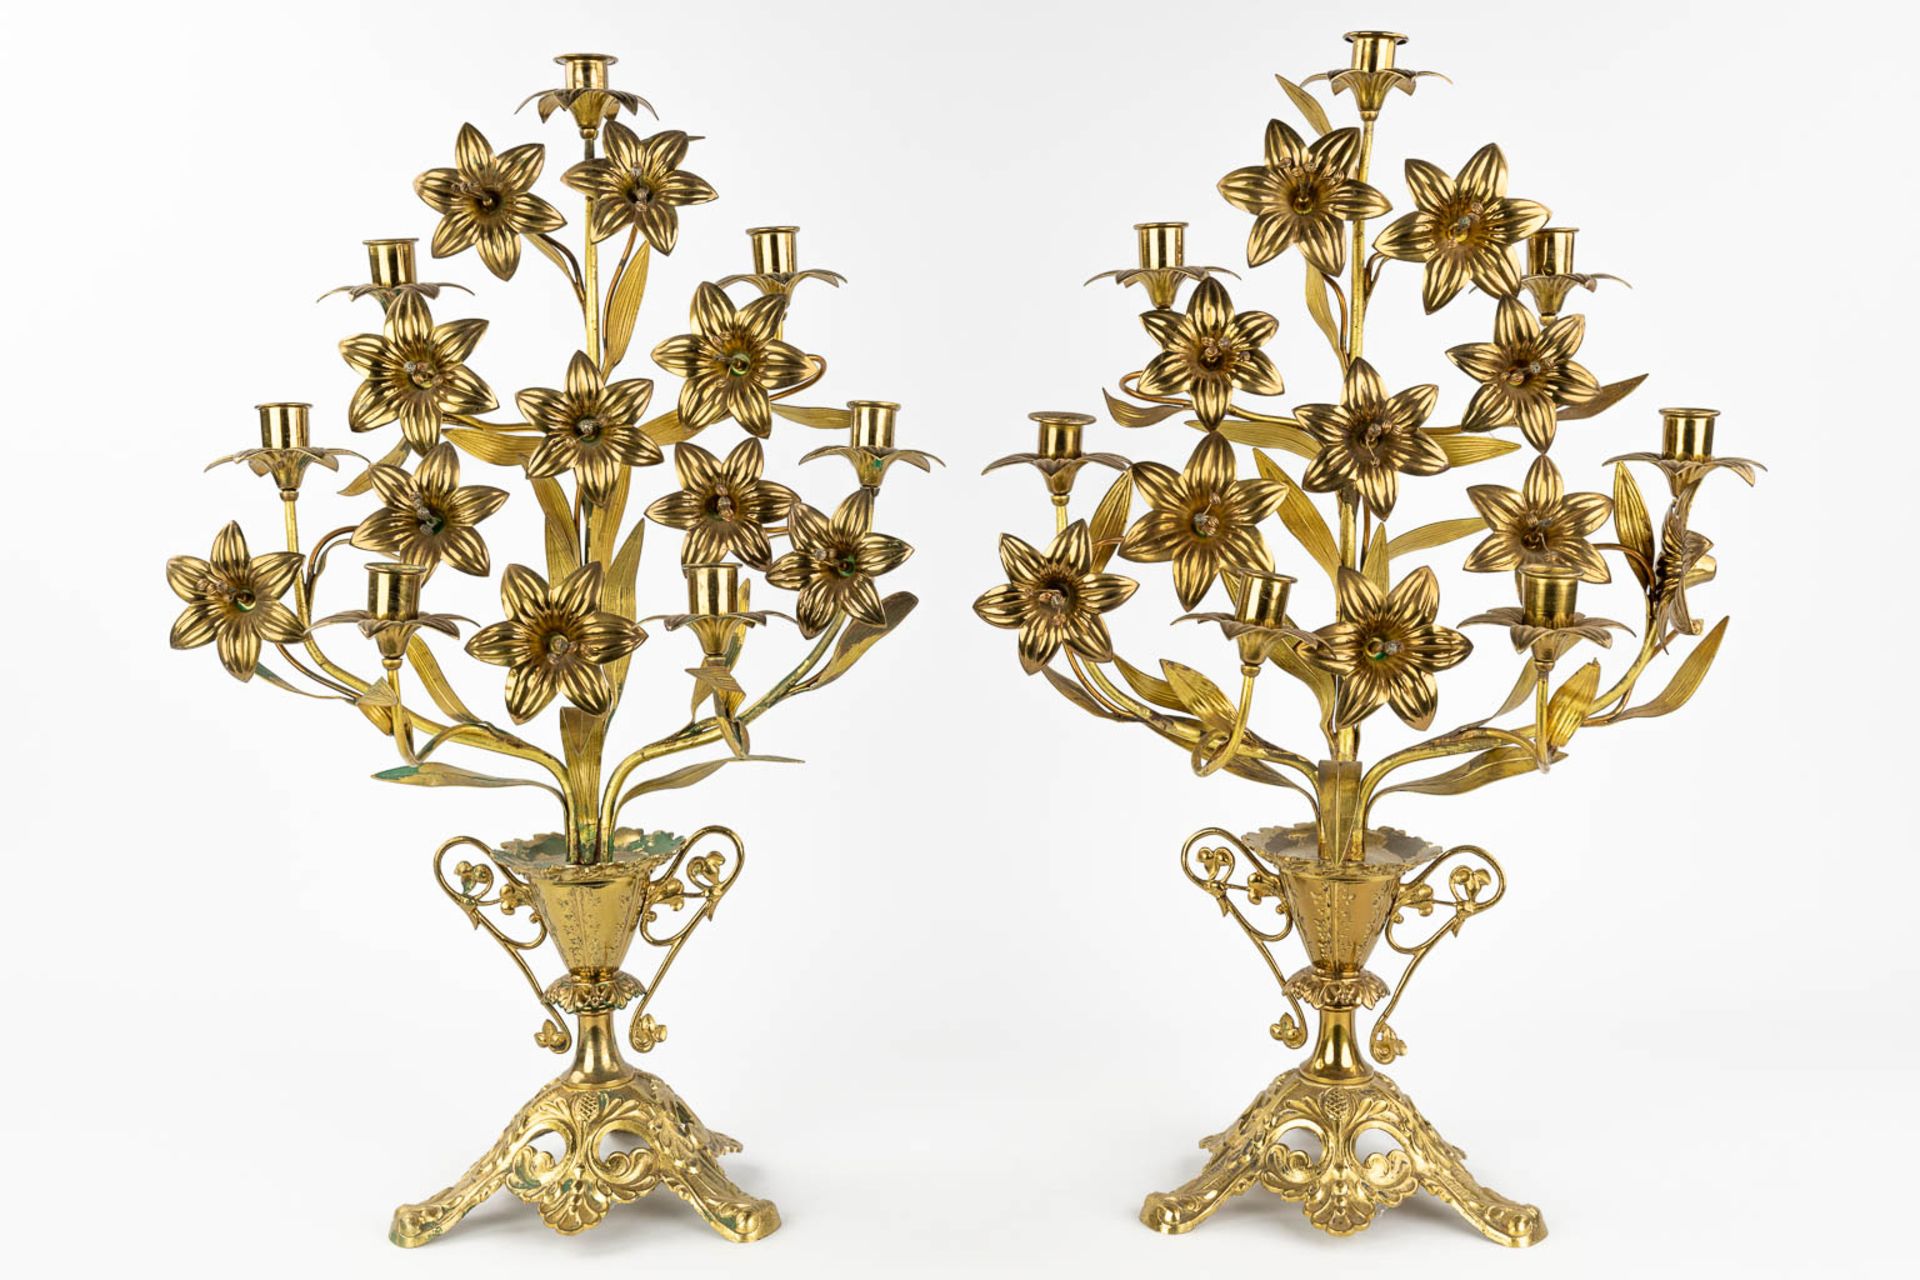 A pair of Church candlesticks, bronze and decorated with flowers. (L: 23 x W: 38 x H: 53 cm) - Image 3 of 13